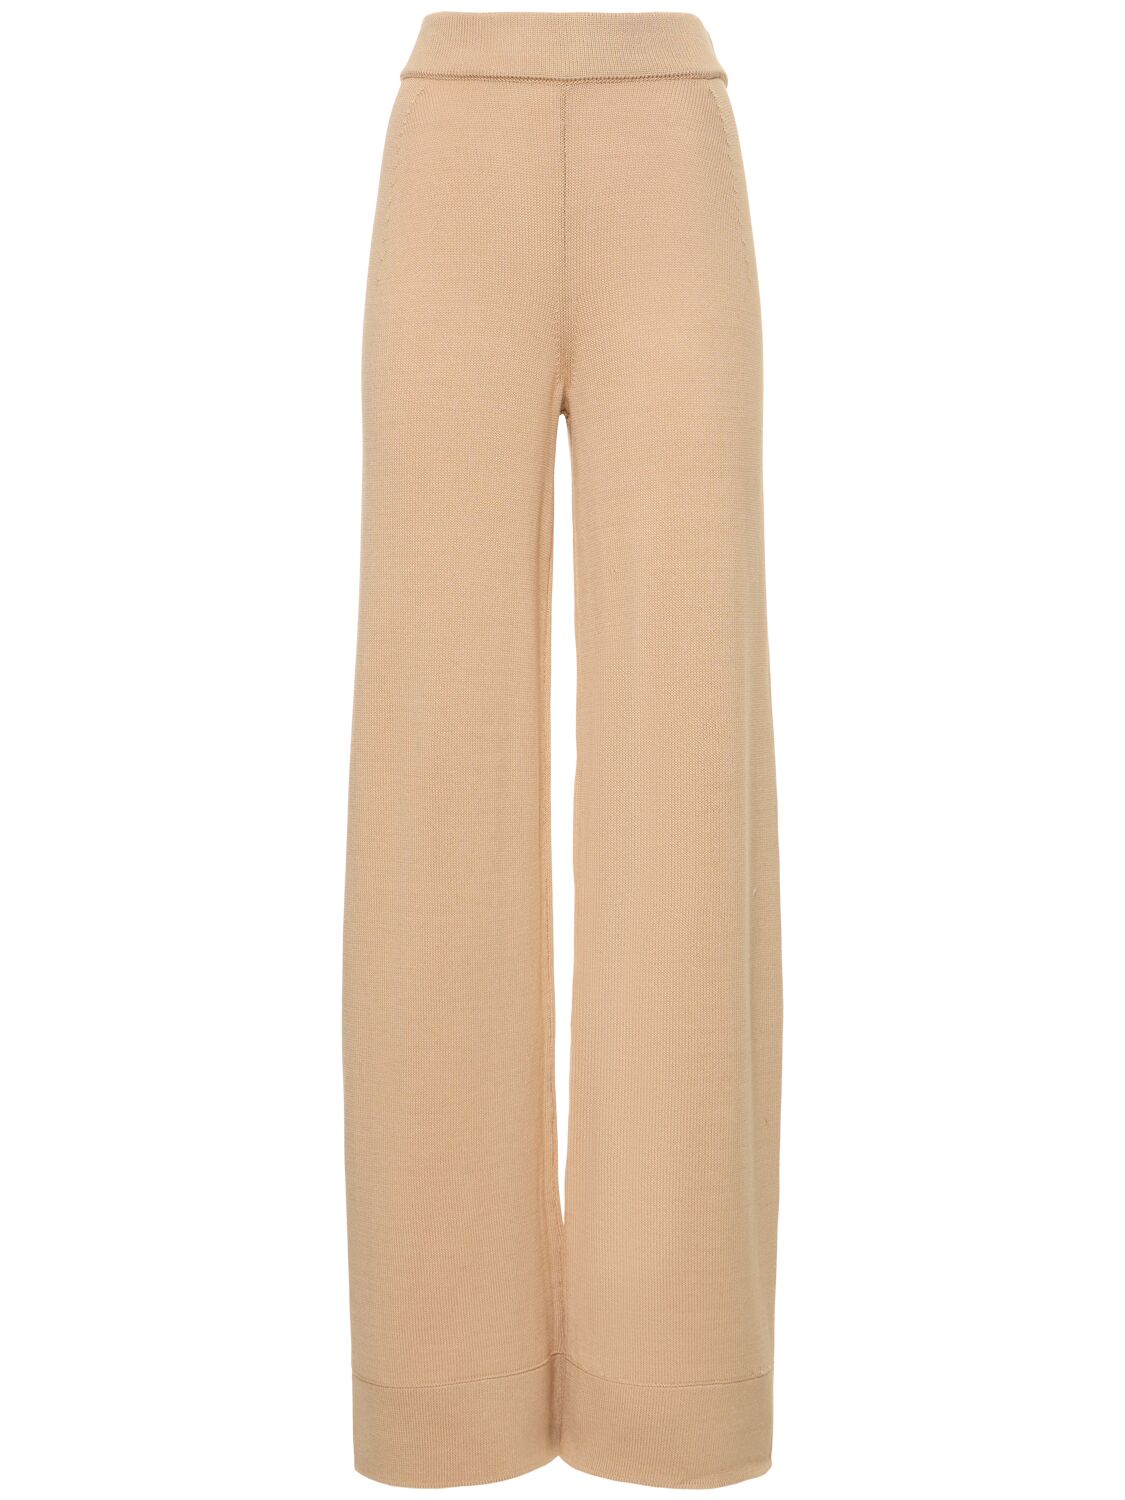 Ermanno Scervino Ribbed Cotton Jersey High Rise Pants In Beige